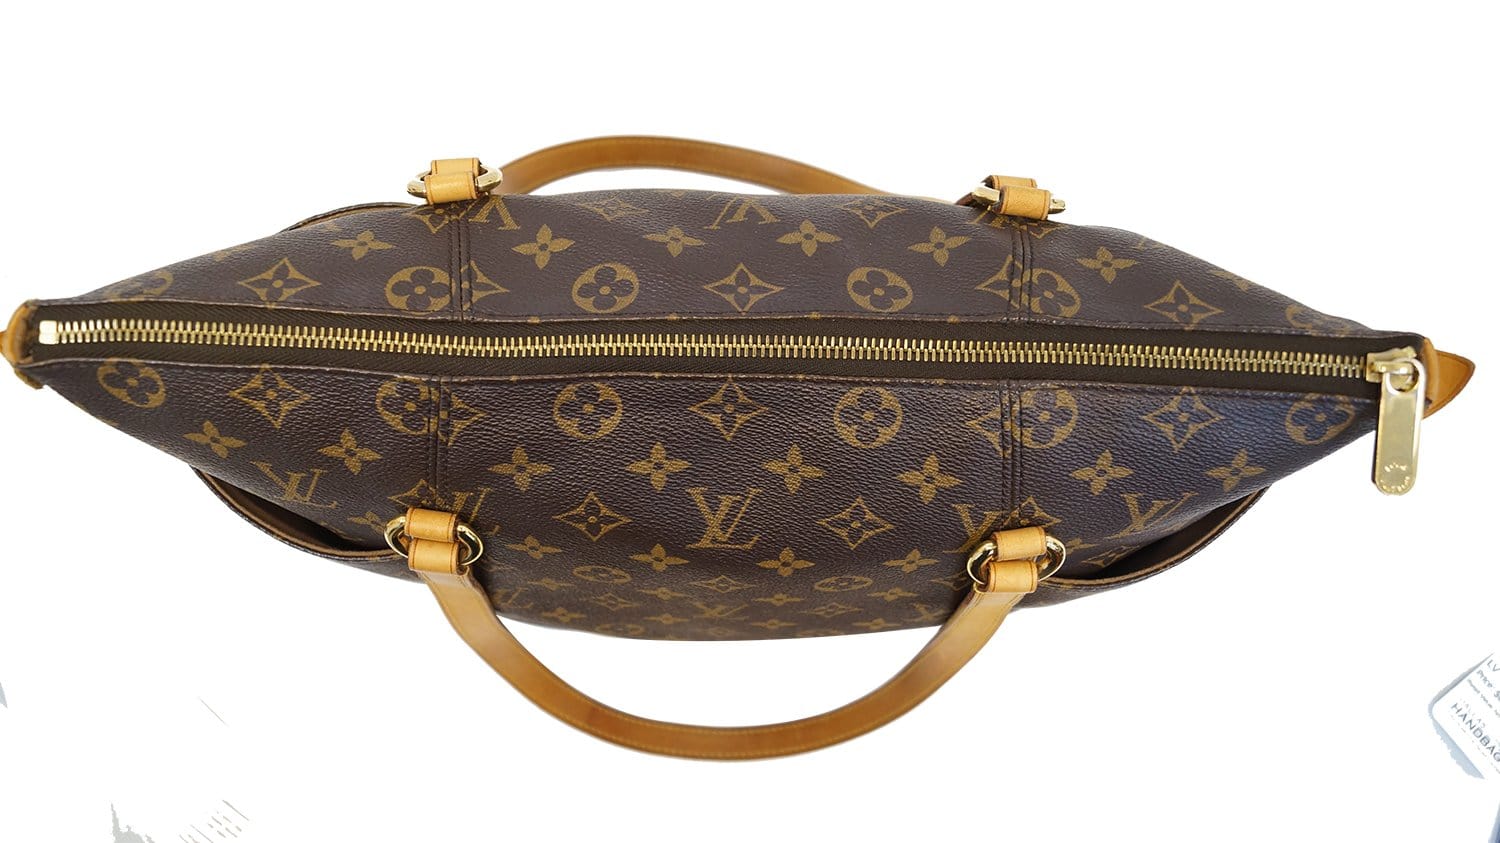 Louis-Vuitton-Monogram-Totally-GM-Tote-Bag-Hand-Bag-M56690 – dct-ep_vintage  luxury Store